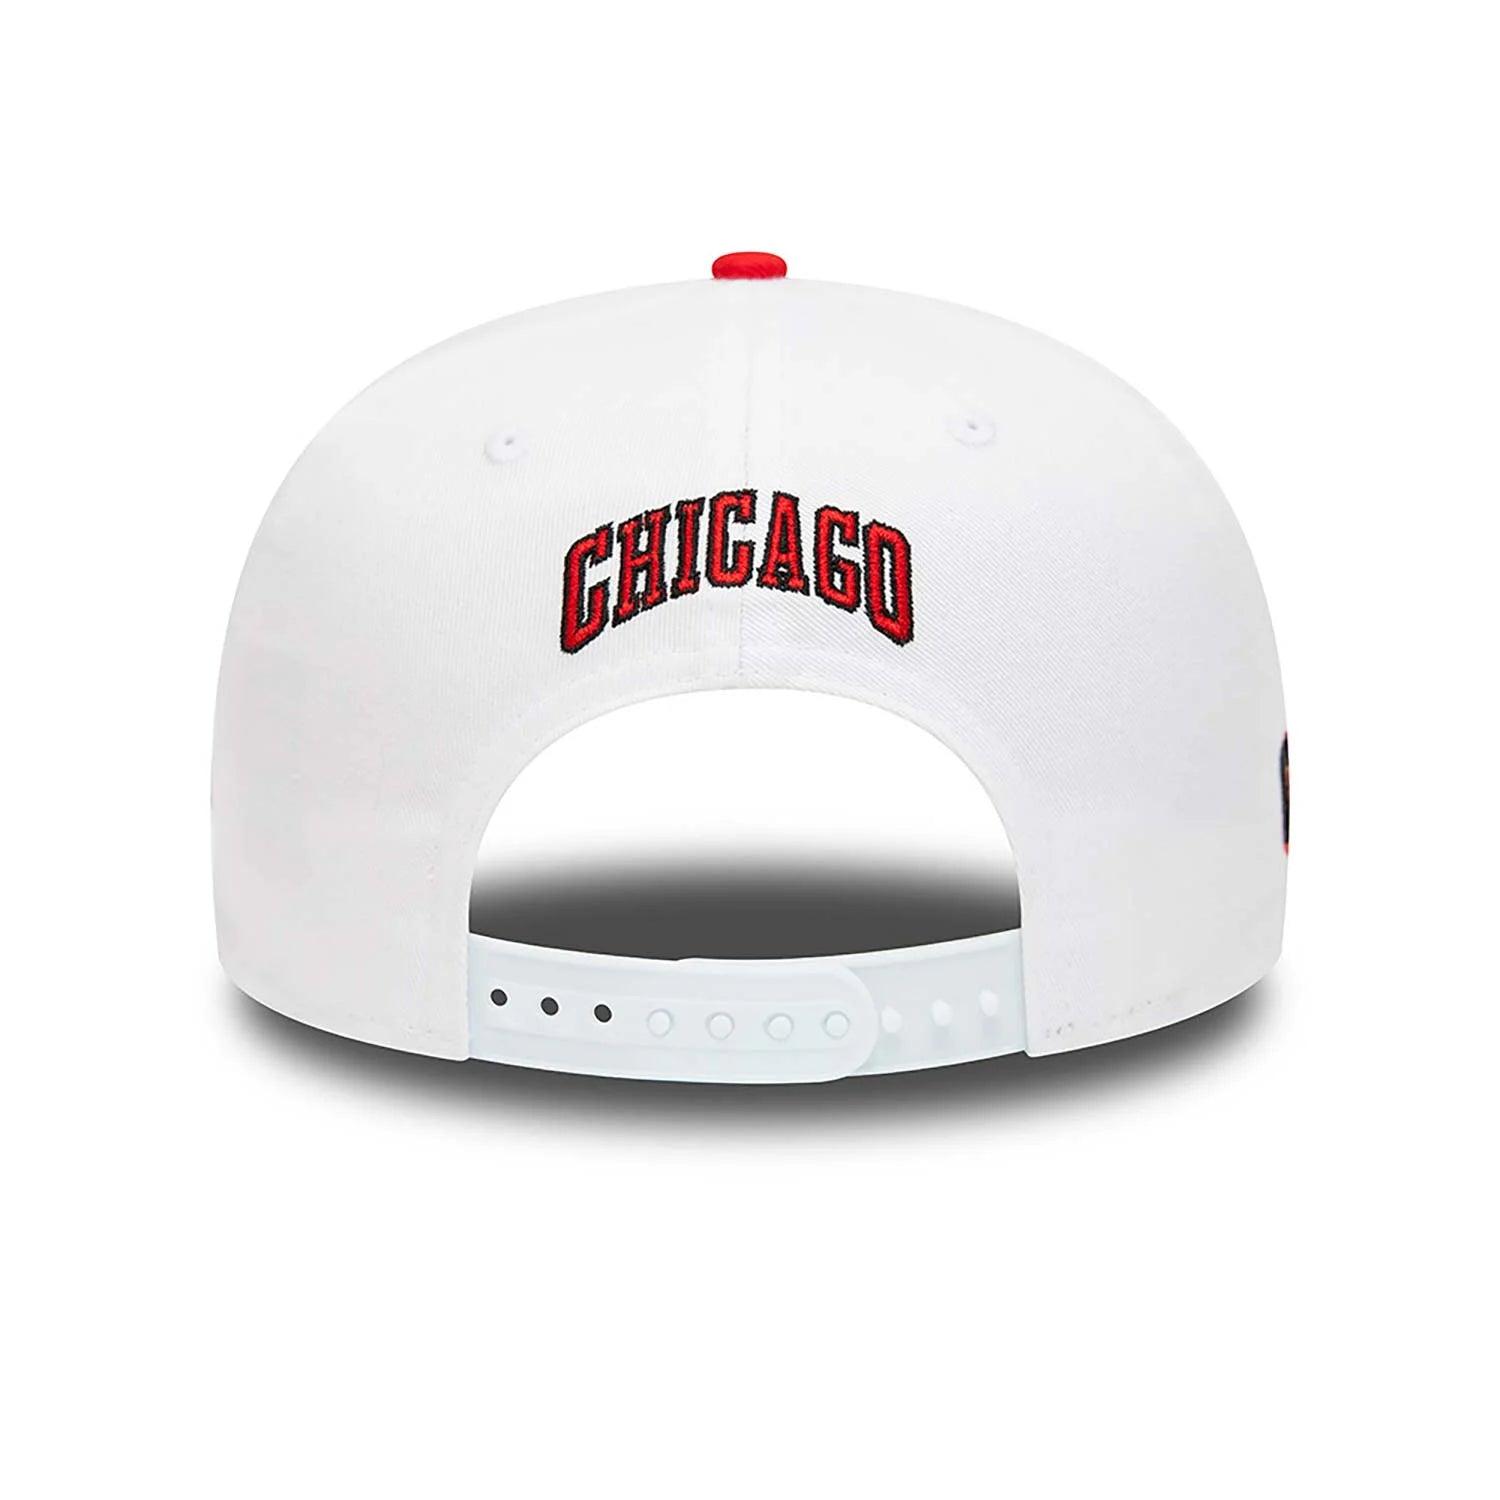 NEW ERA 9FIFTY WHITE CROWN PATCHES CHICAGO BULLS TWO TONE SNAPBACK - FAM